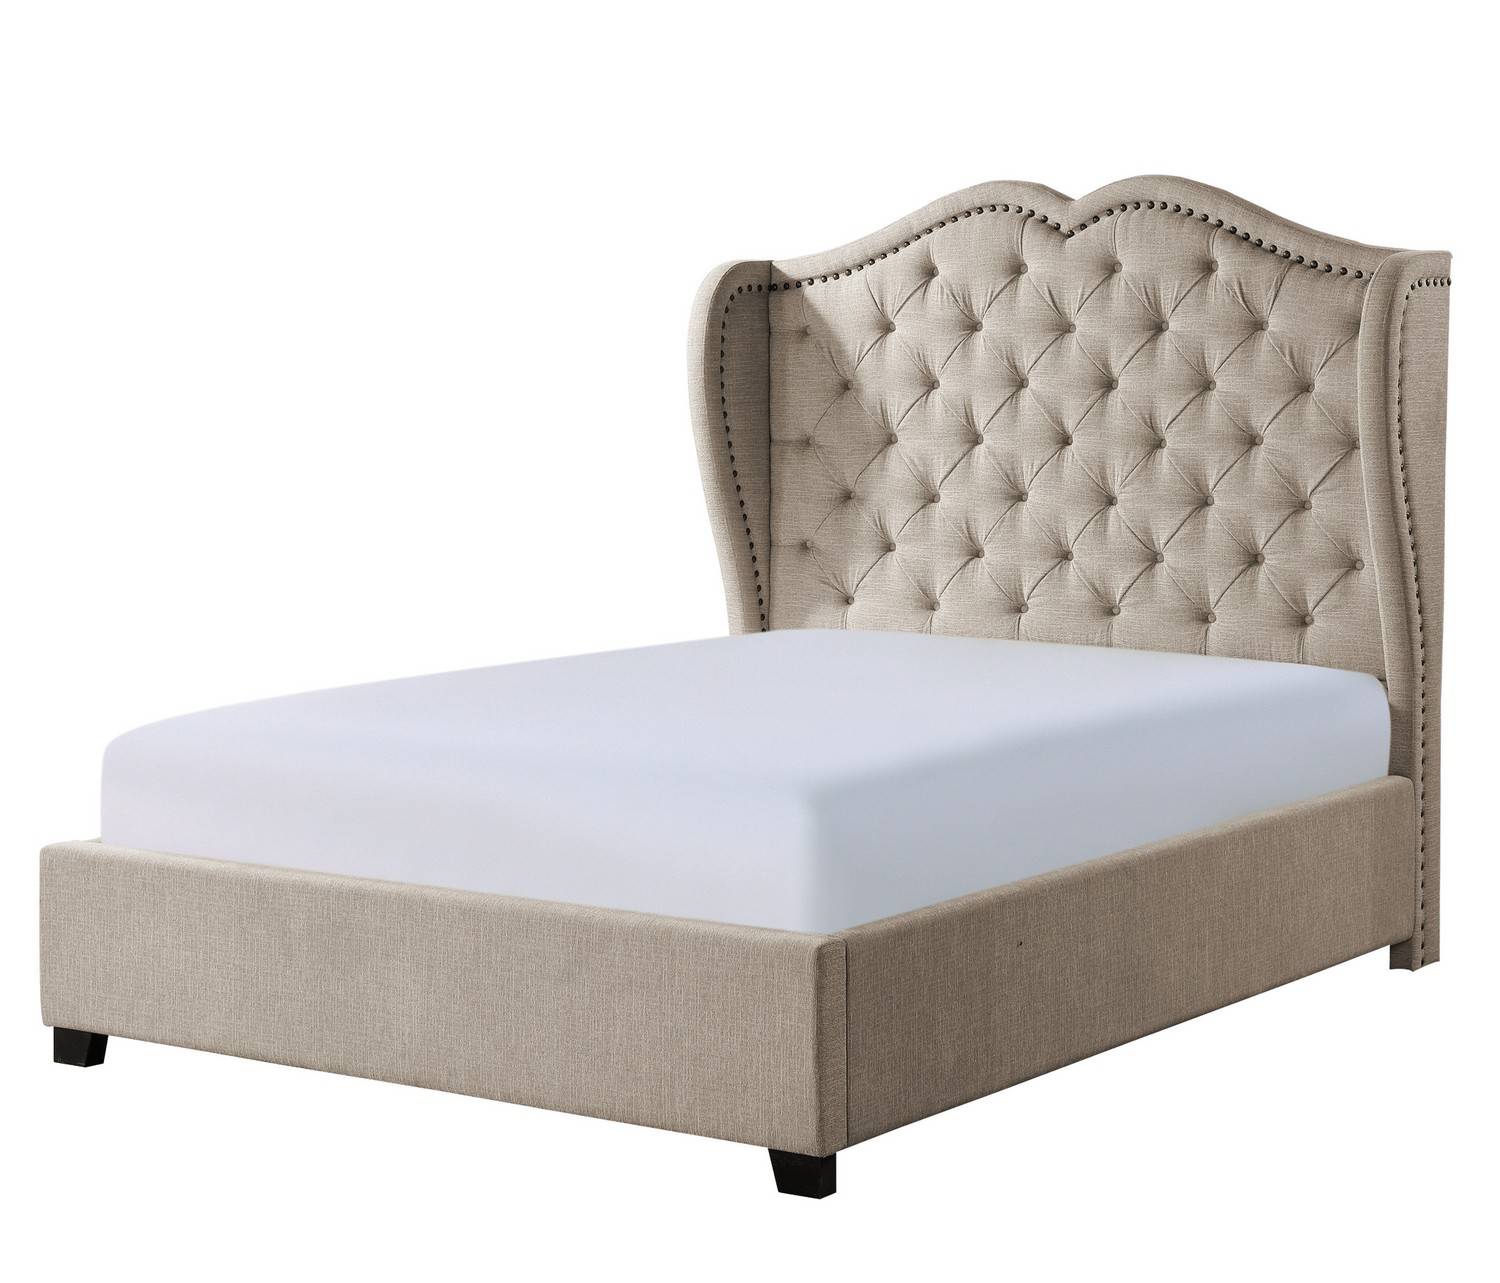 Homelegance Waterlyn Tufted Bed - Neutral Toned